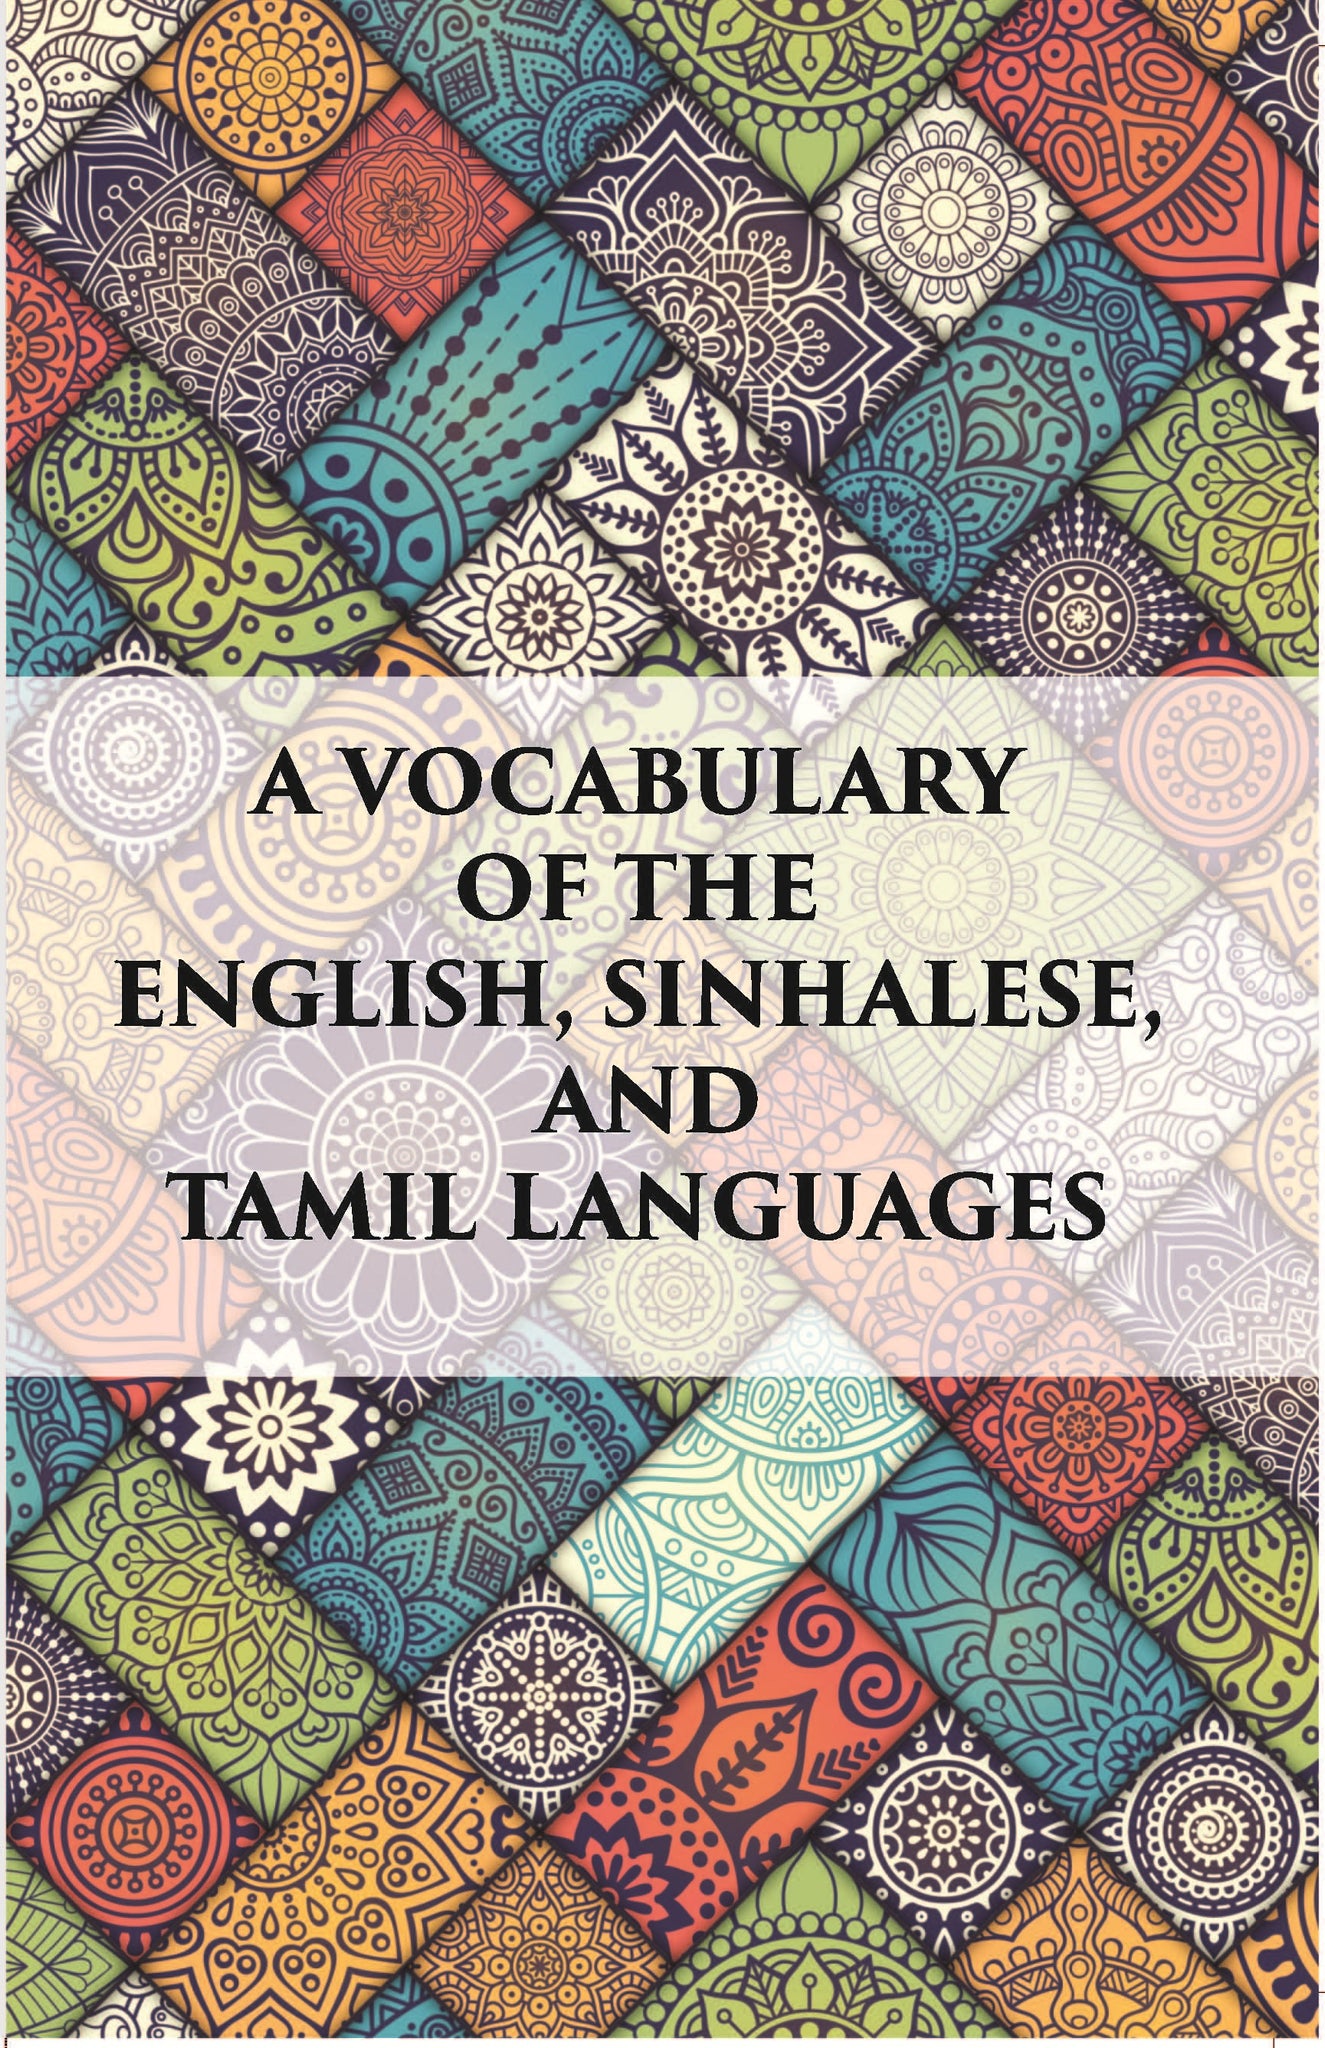 A Vocabulary Of The English, Sinhalese And Tamil Languages